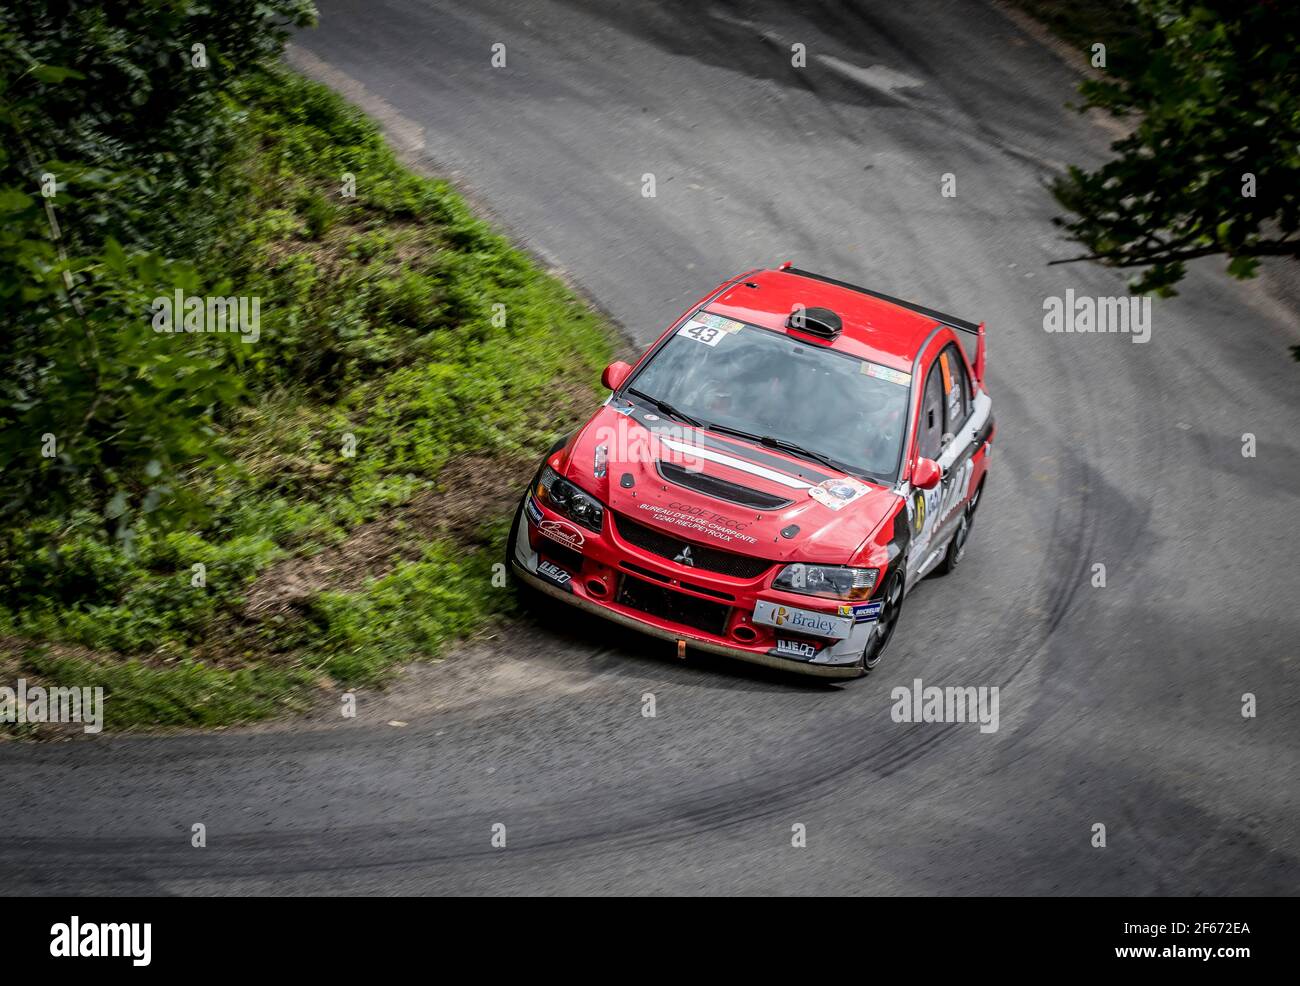 43 ALAUZET Philippe and LAVIALE Jean Marc, Mitsubishi Lancer Evo 9 R4  action during the 2017 rallye du Rouergue, on July 9, Rodez, France - Photo  Gregory Lenormand / DPPI Stock Photo - Alamy